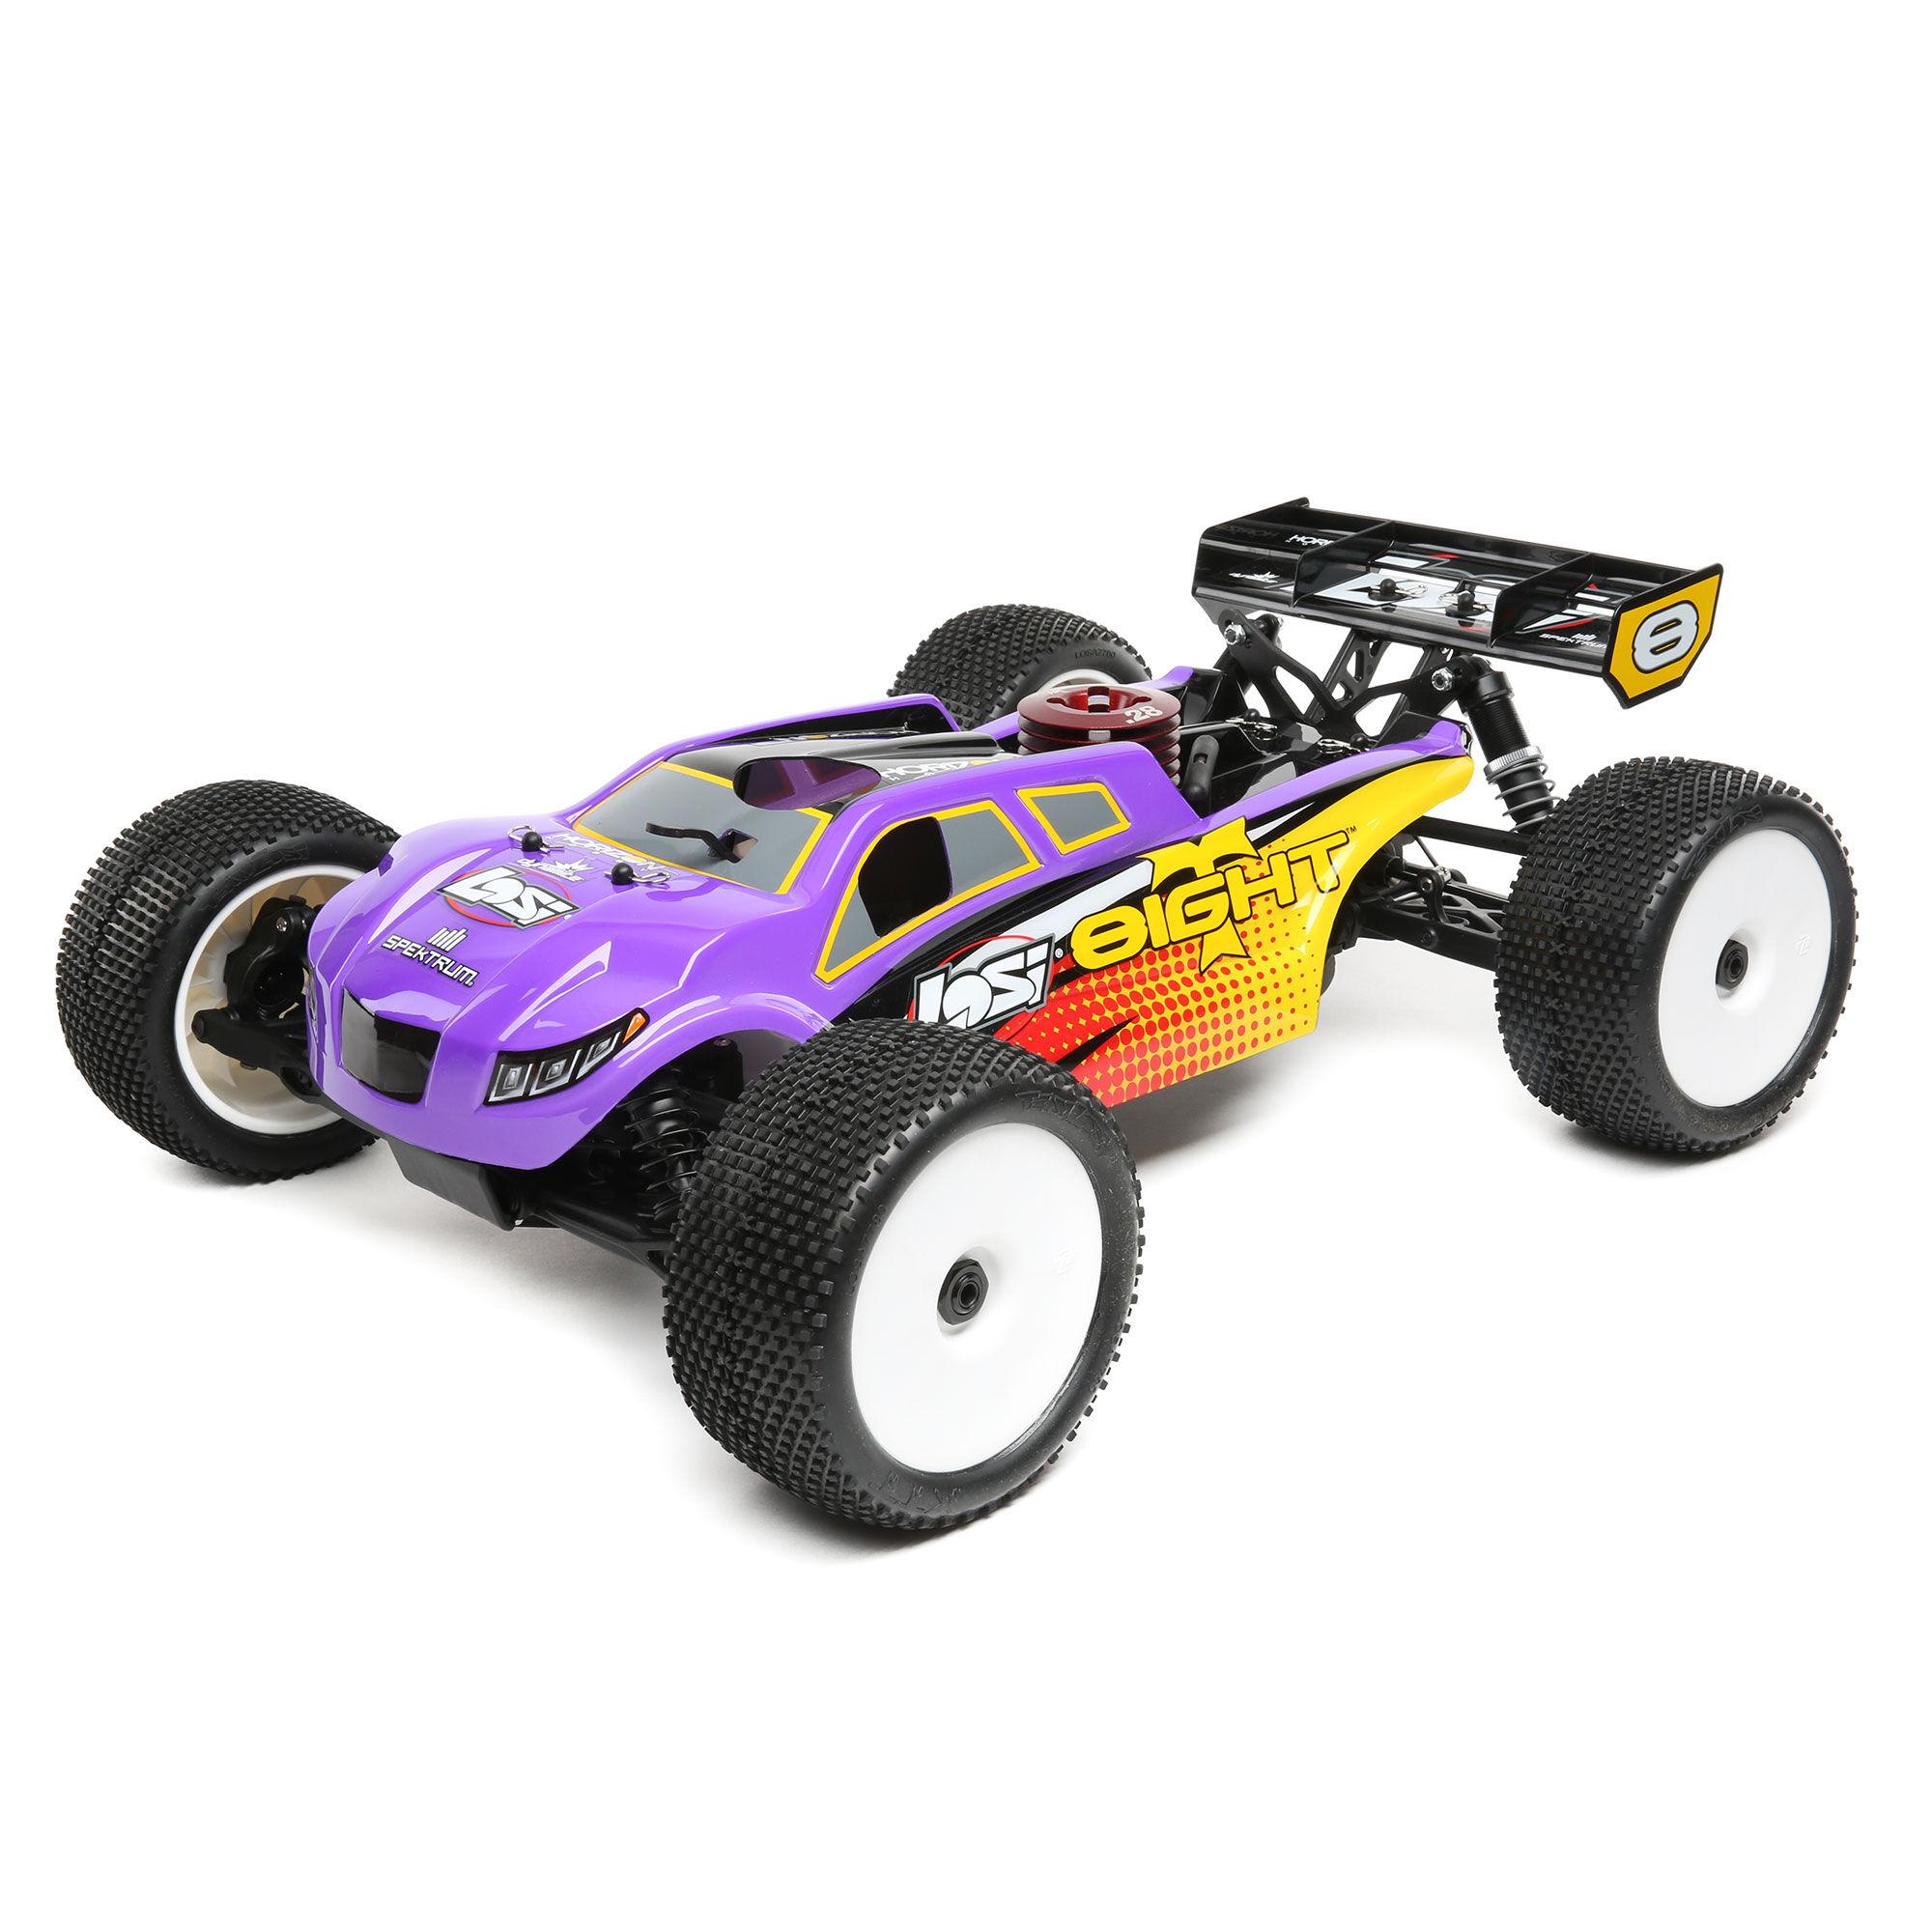 1/8 Gas Powered Rc Cars:  Durability: Key Features of 1/8 Gas Powered RC Cars